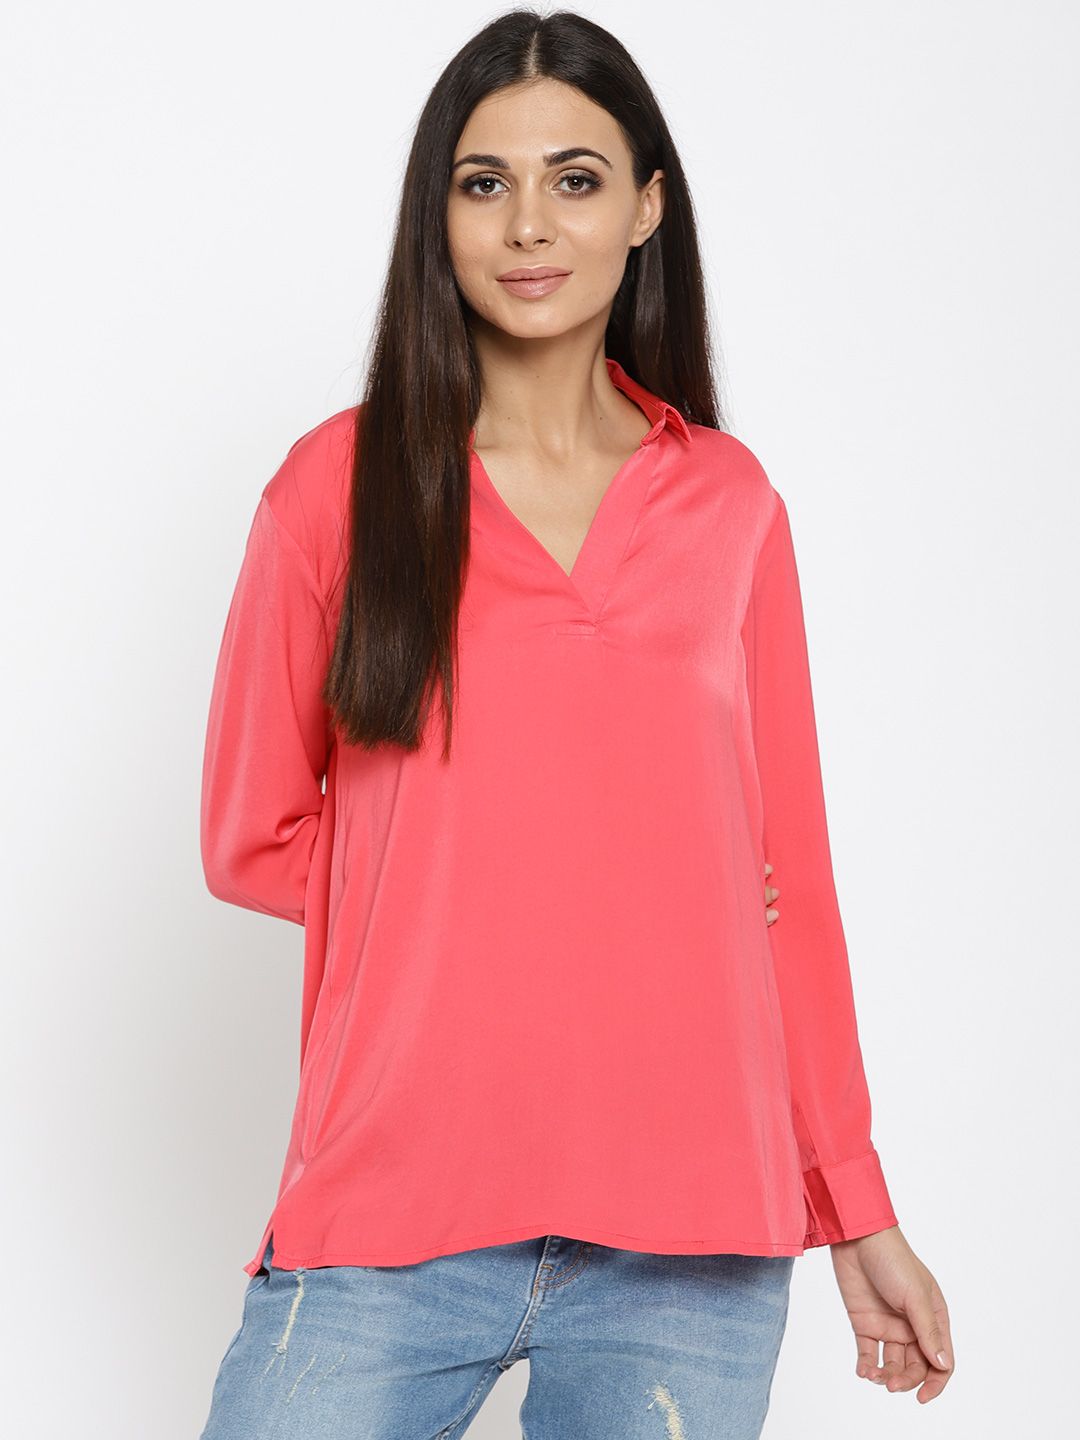 United Colors of Benetton Women Coral Pink Solid Shirt Style Top Price in India